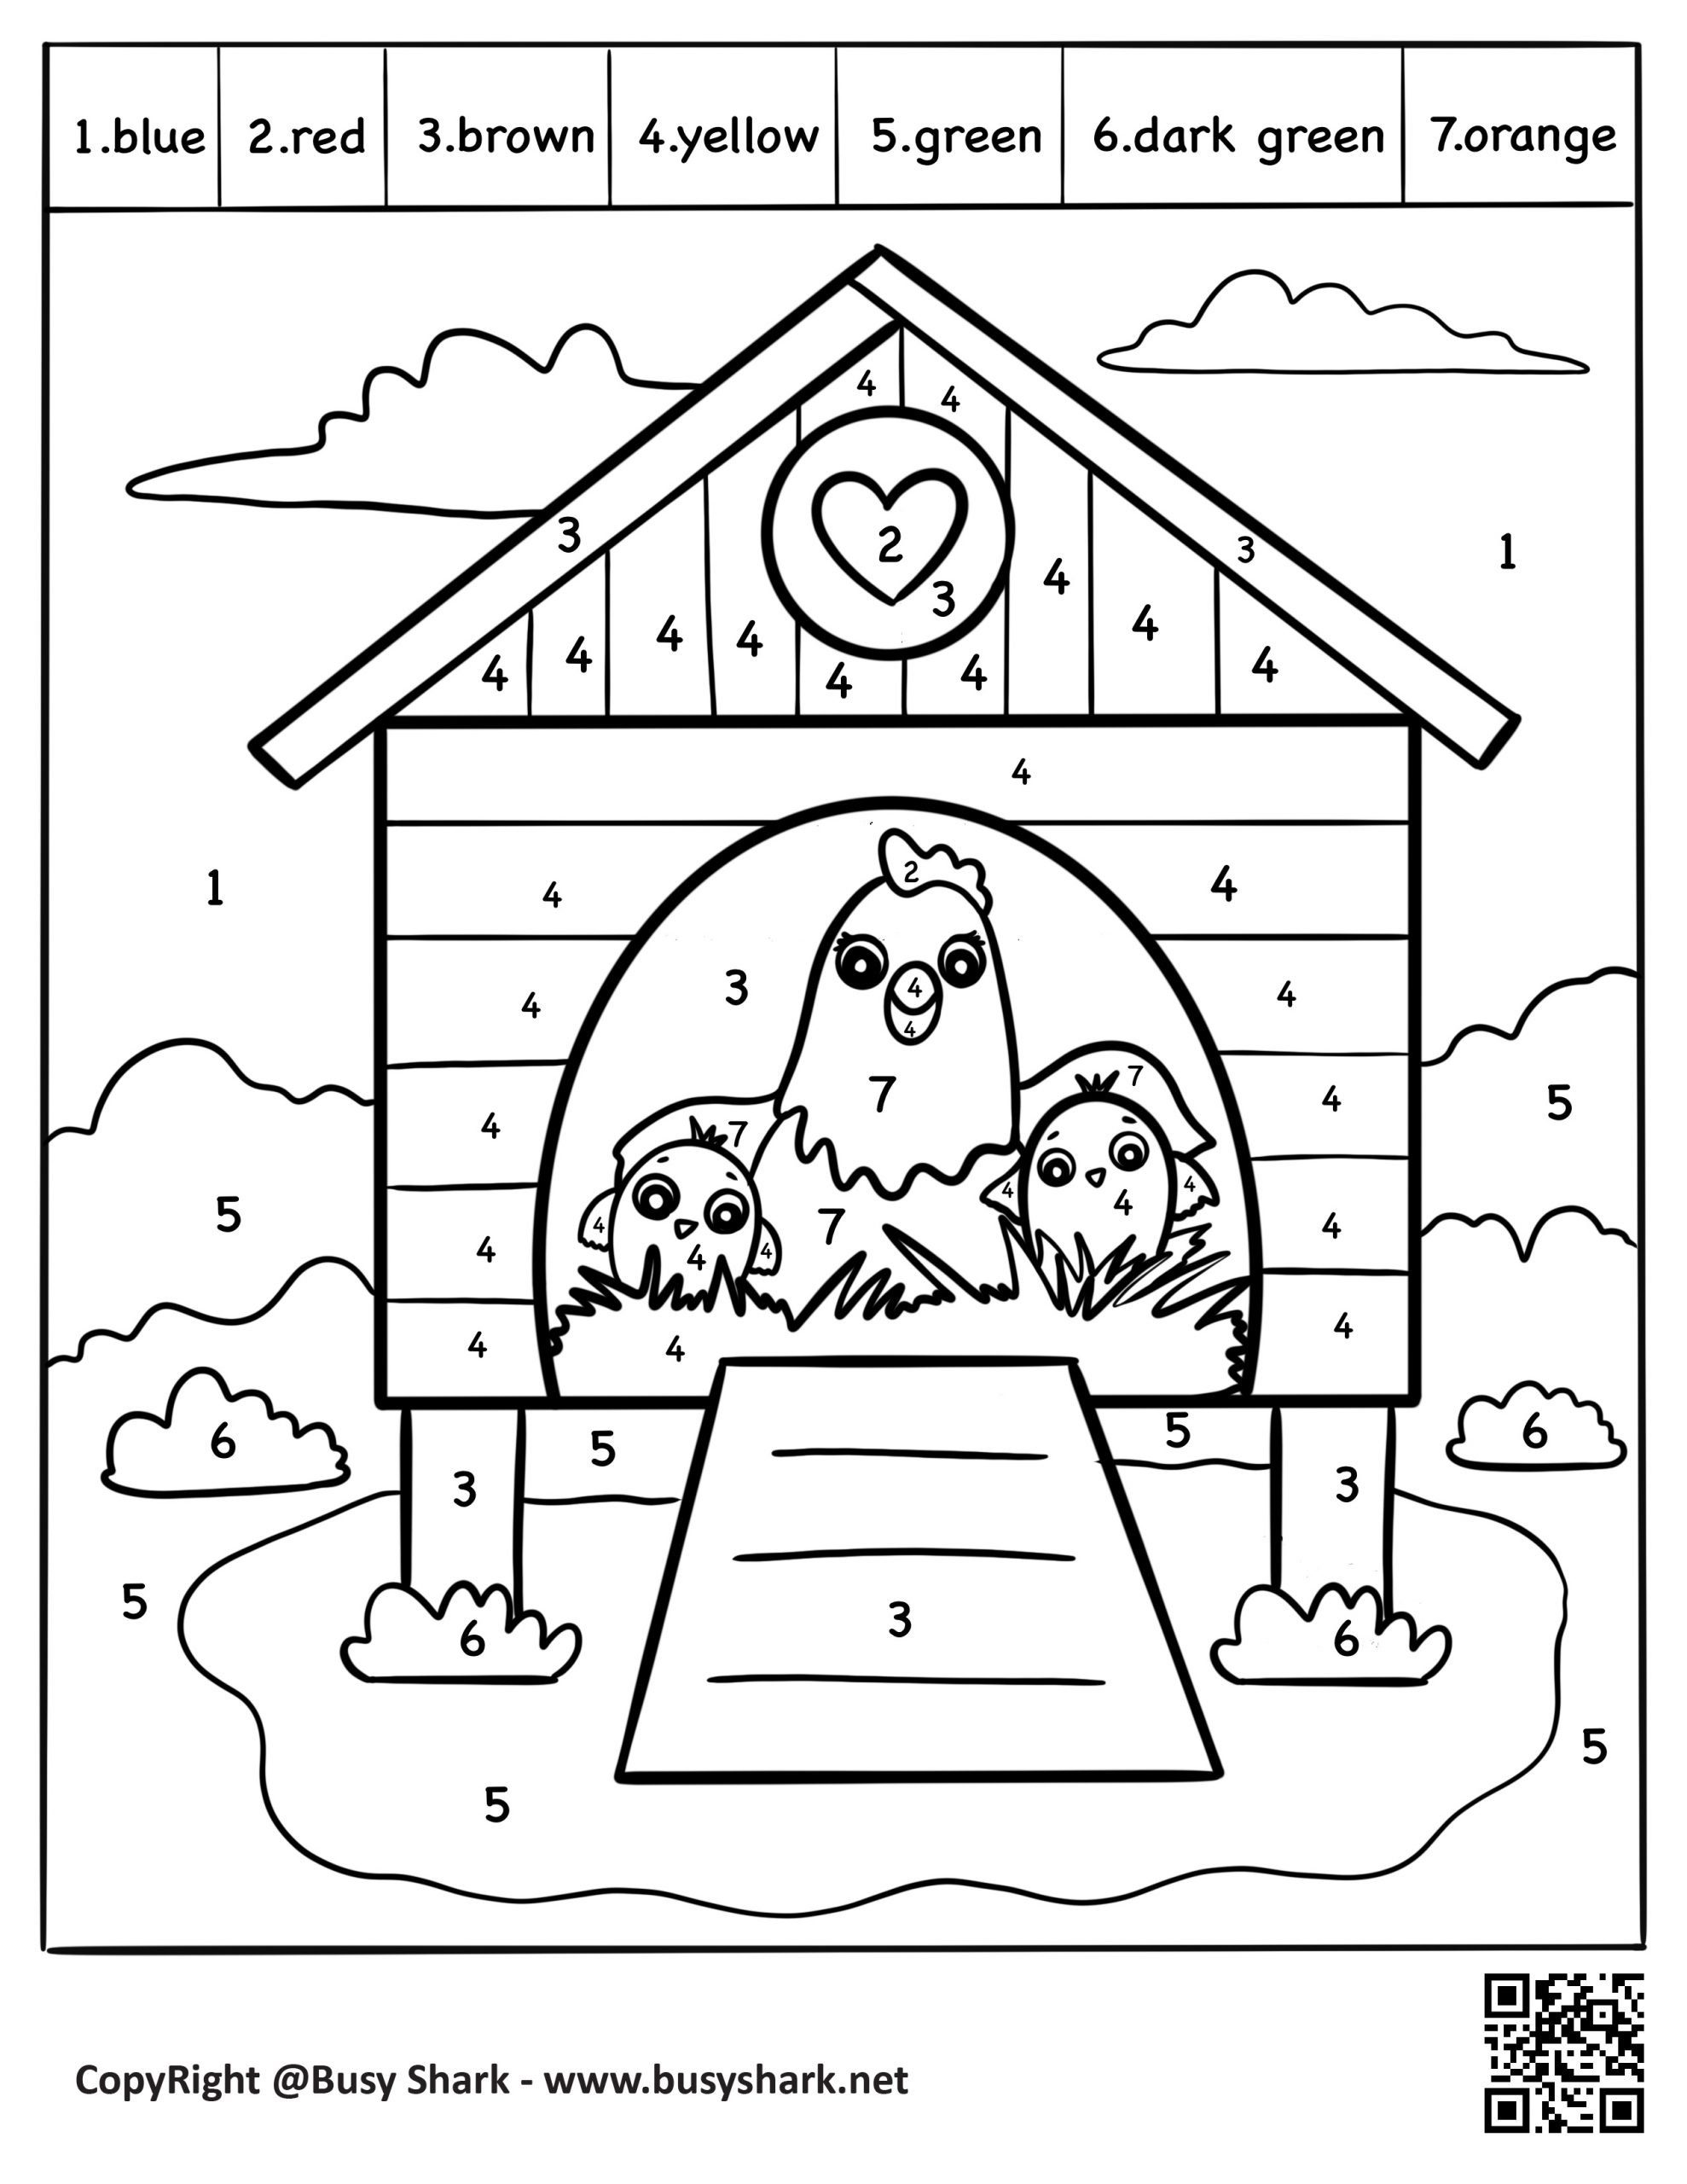 Farms chicken coop color by number coloring page